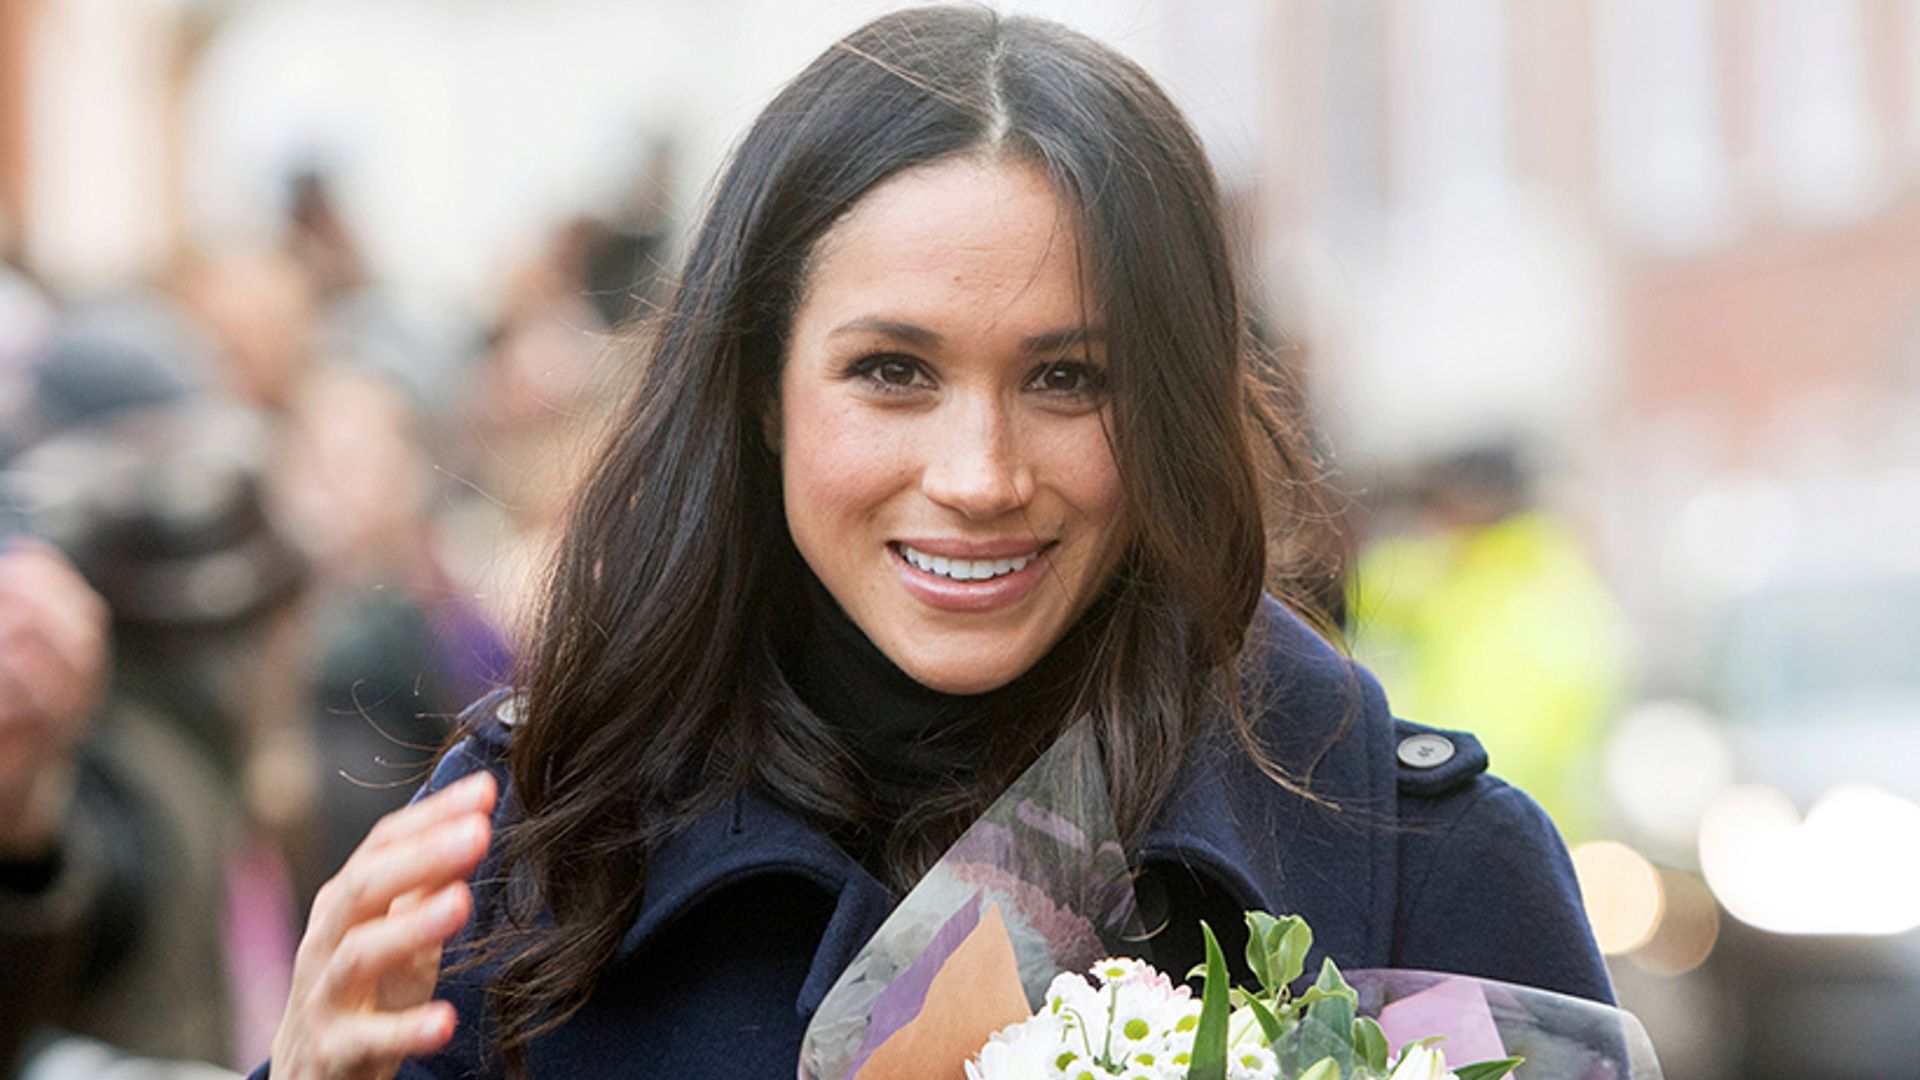 meghan markle nottingham total outfit